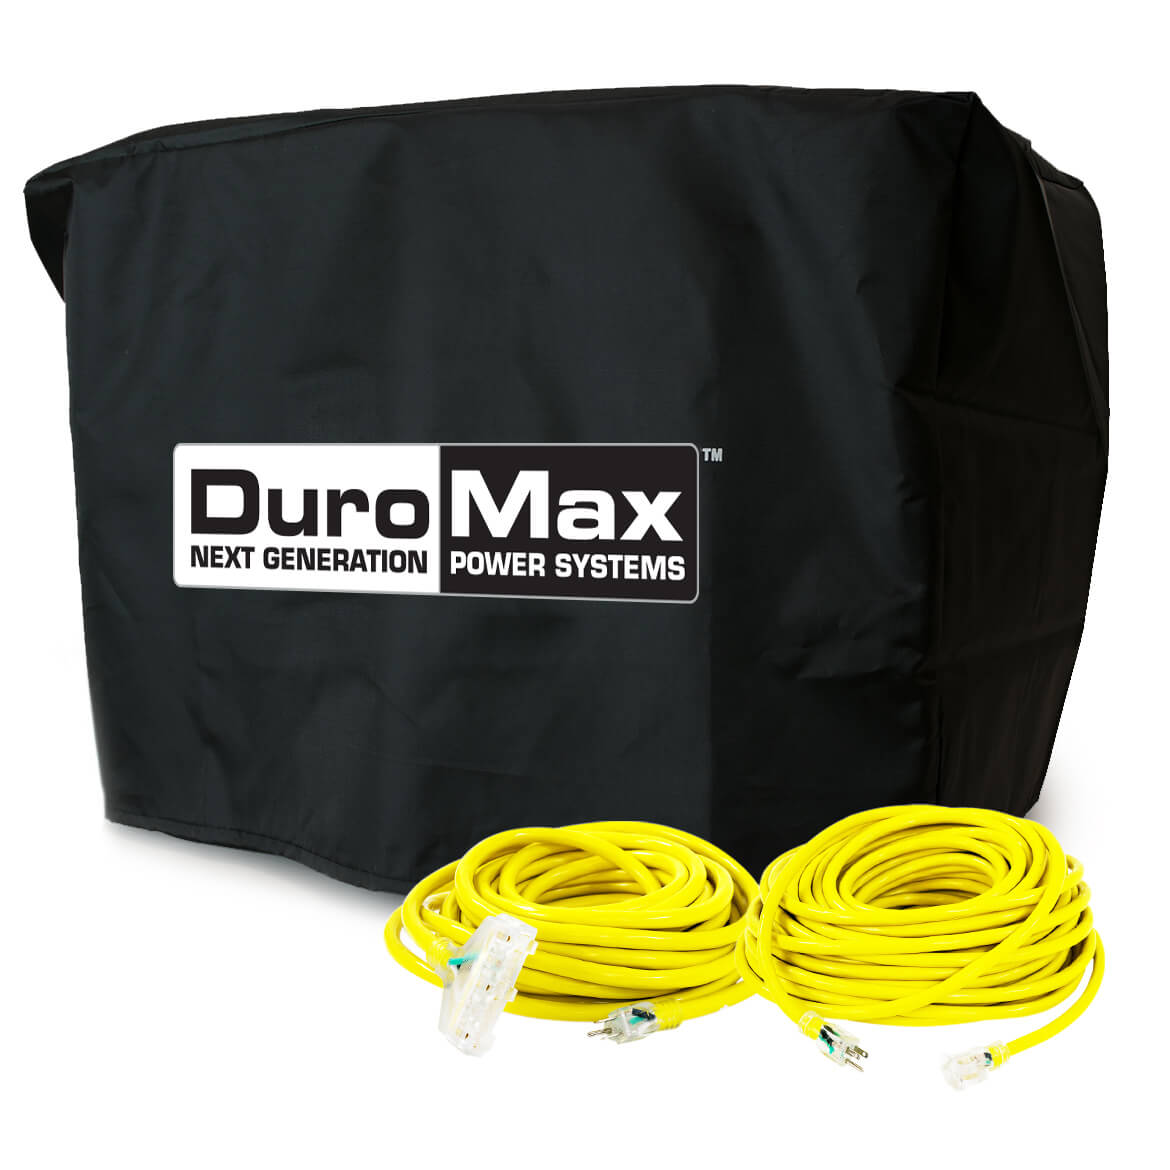 DuroMax, DuroMax XP10000-DXKIT 100-Foot Extension Power Cord Kit w/ Generator Cover